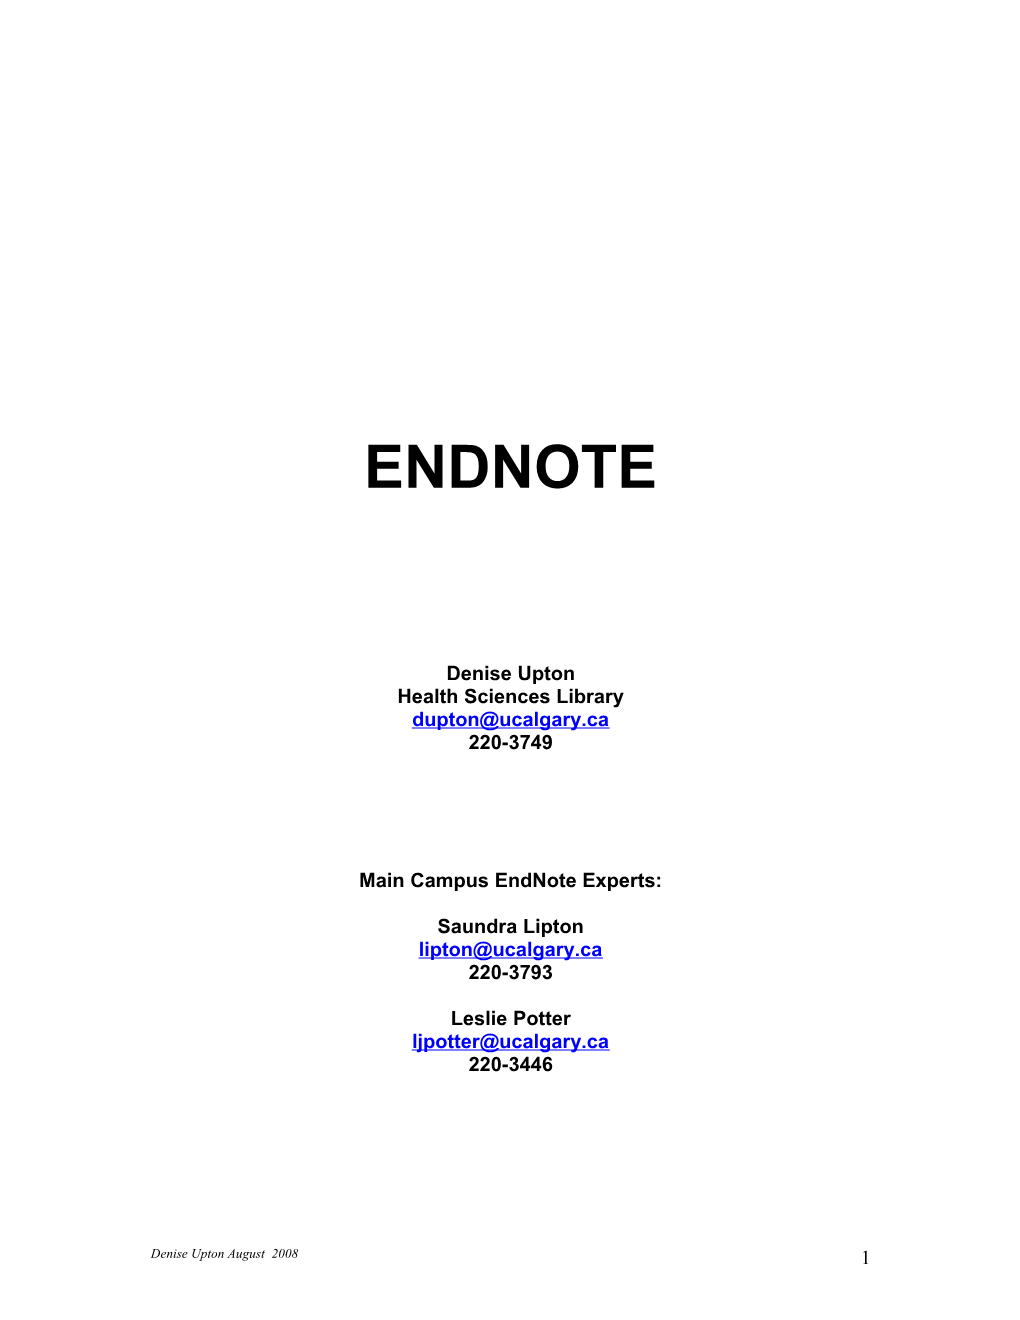 To Start Endnote